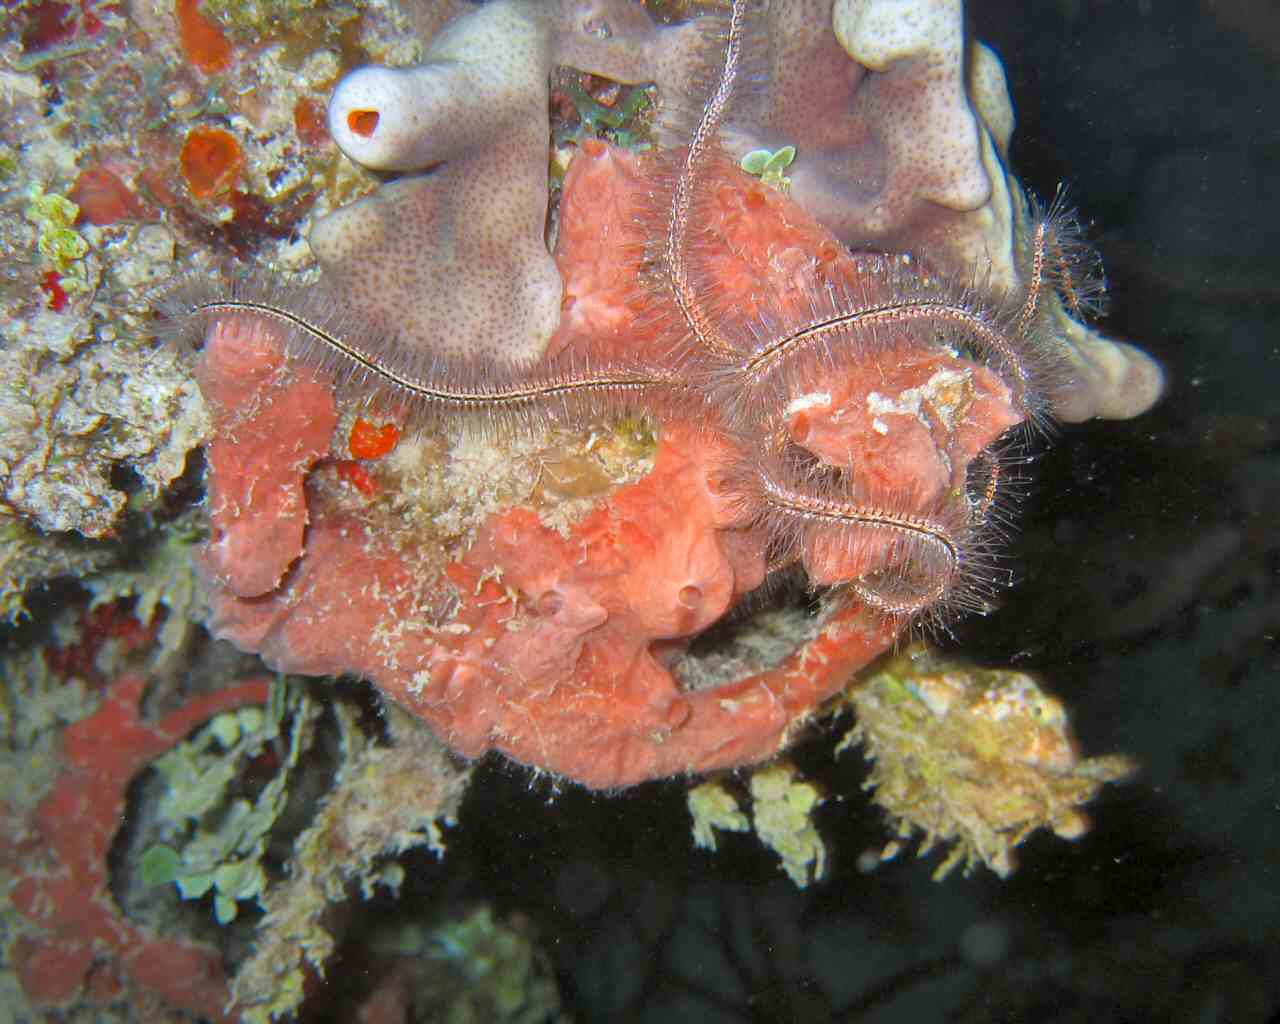 Brittle Star on the Prince Albert